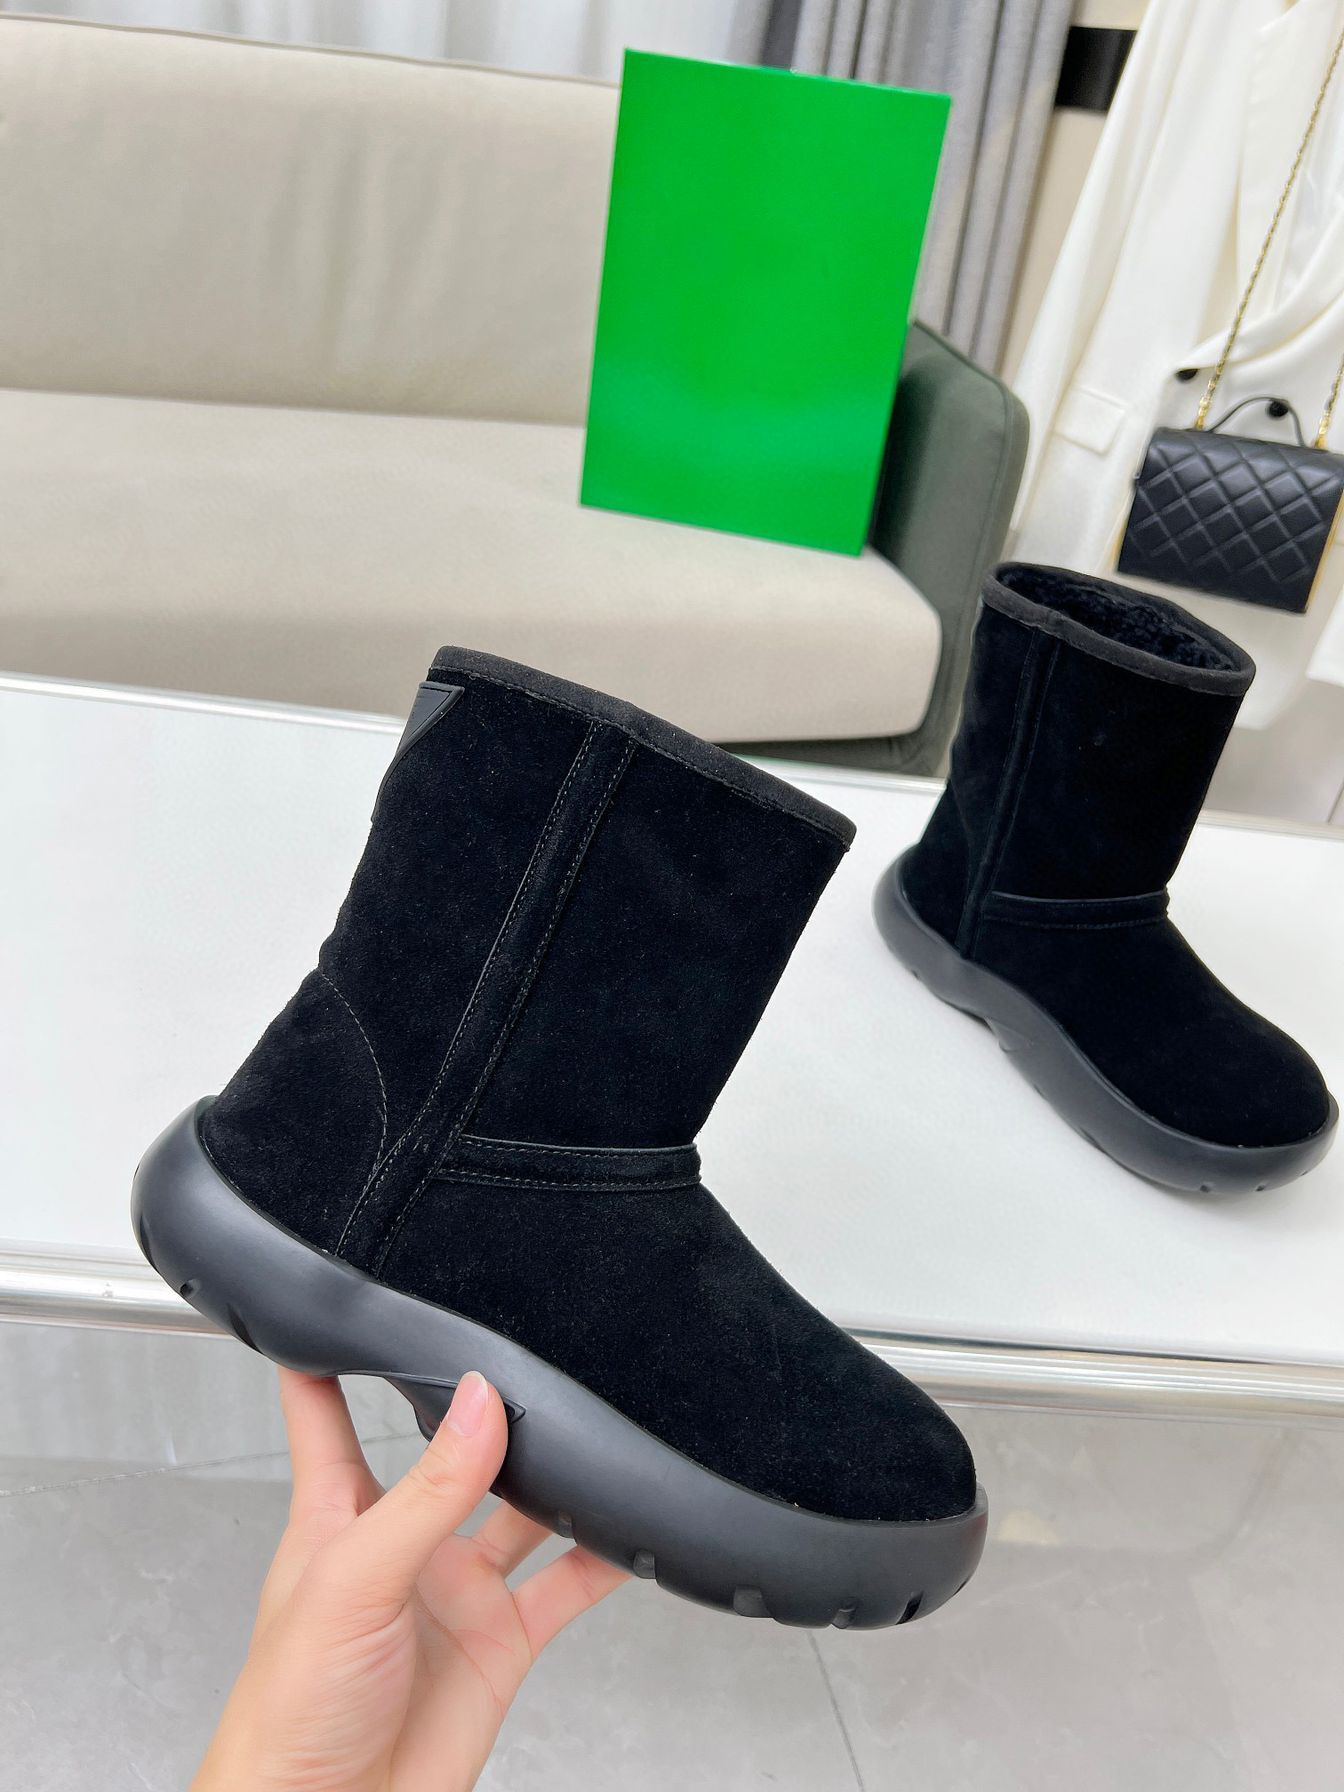 winter wool boots Cold resistant snow boot designer shoe classic platform womens shoe High top shoes thick bottom woman plush Warm Shoes Large size 35-41-42 With box